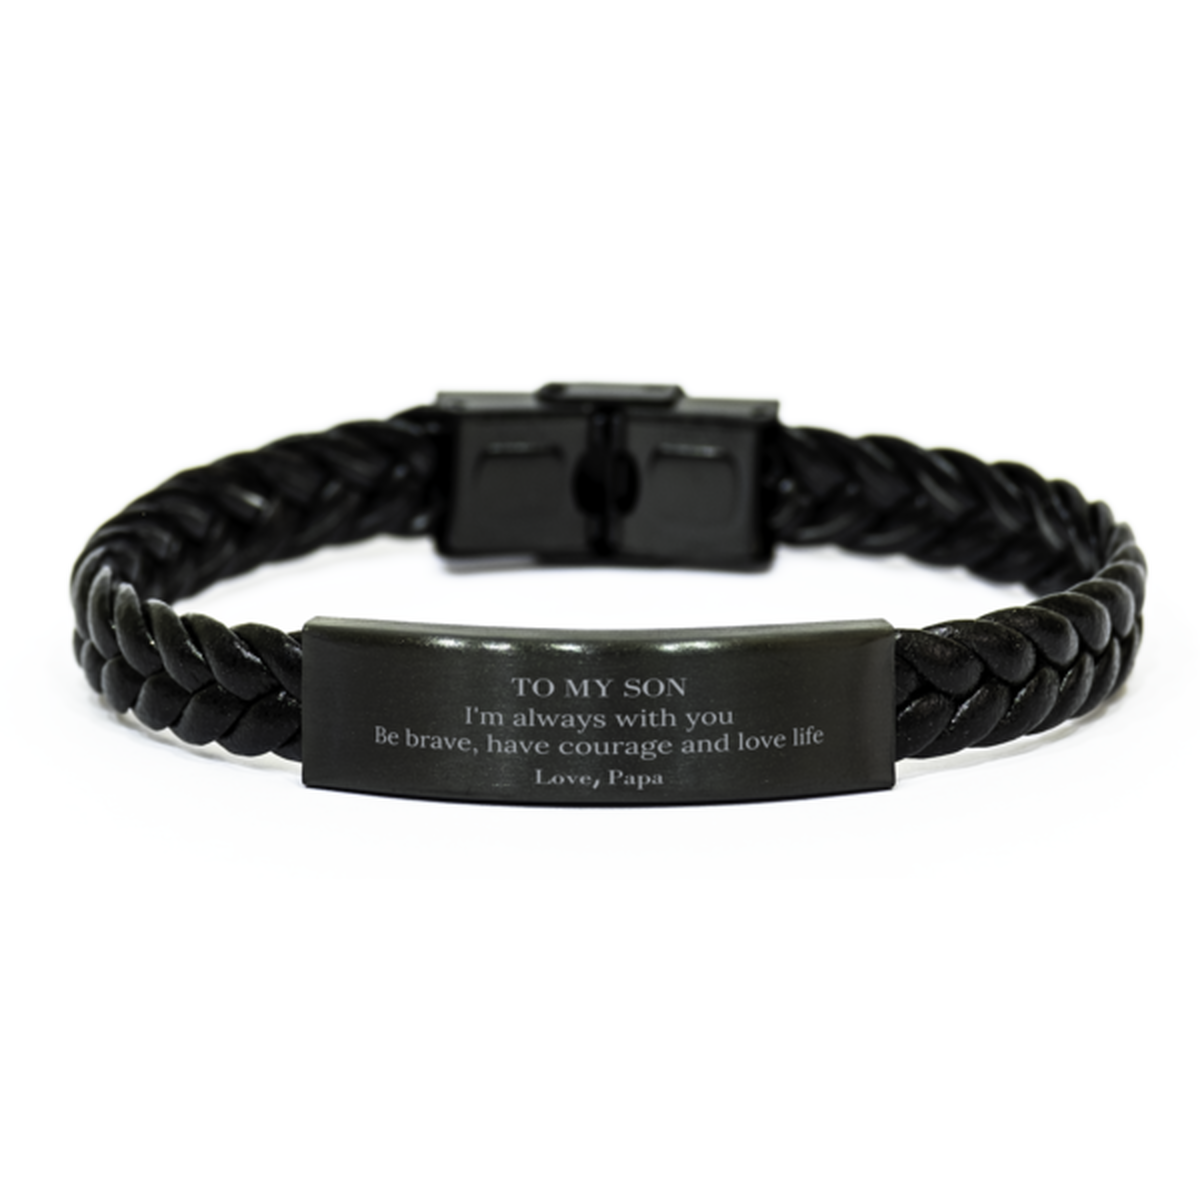 To My Son Gifts from Papa, Unique Braided Leather Bracelet Inspirational Christmas Birthday Graduation Gifts for Son I'm always with you. Be brave, have courage and love life. Love, Papa